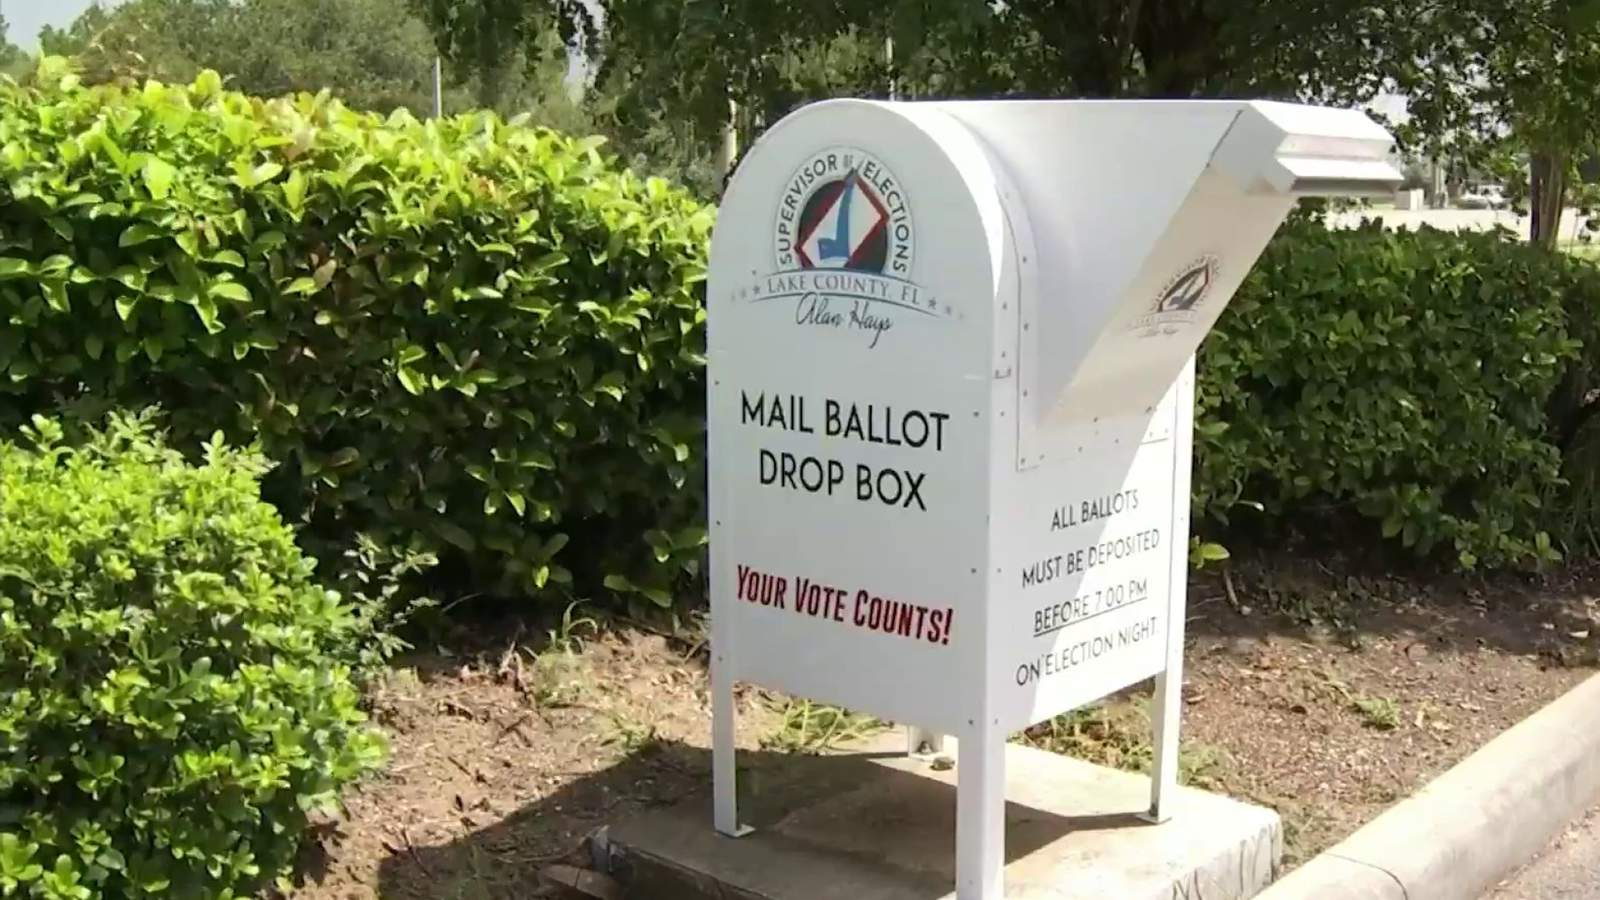 The facts about voting early, by mail or absentee in 2020 election